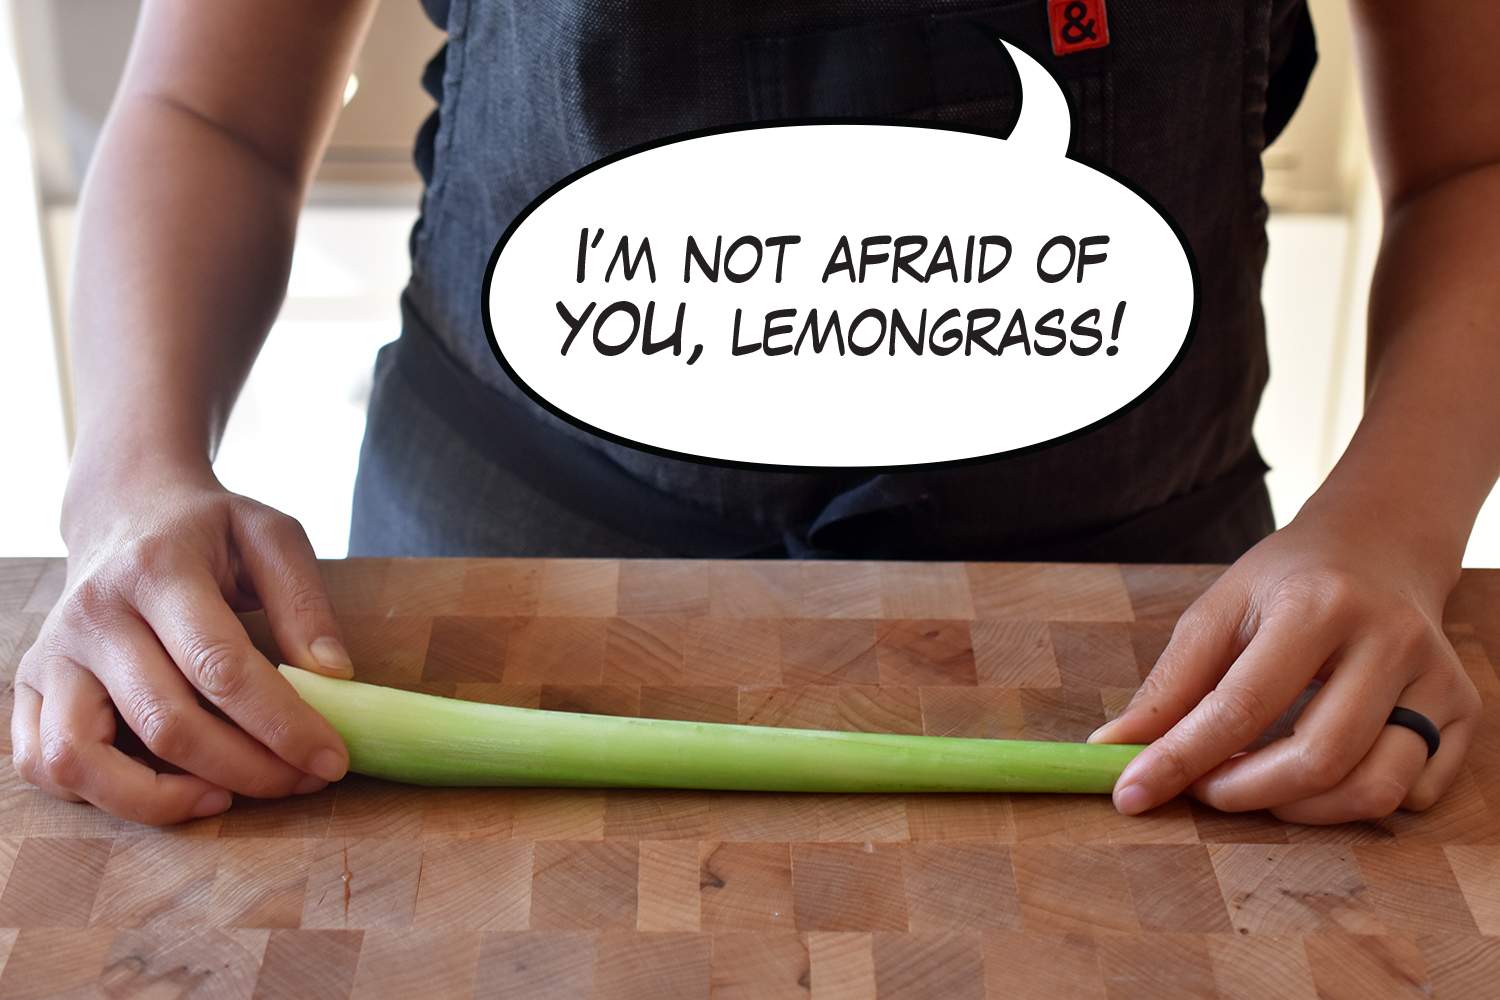 How To Cook With Lemongrass by Michelle Tam http://nomnompaleo.com